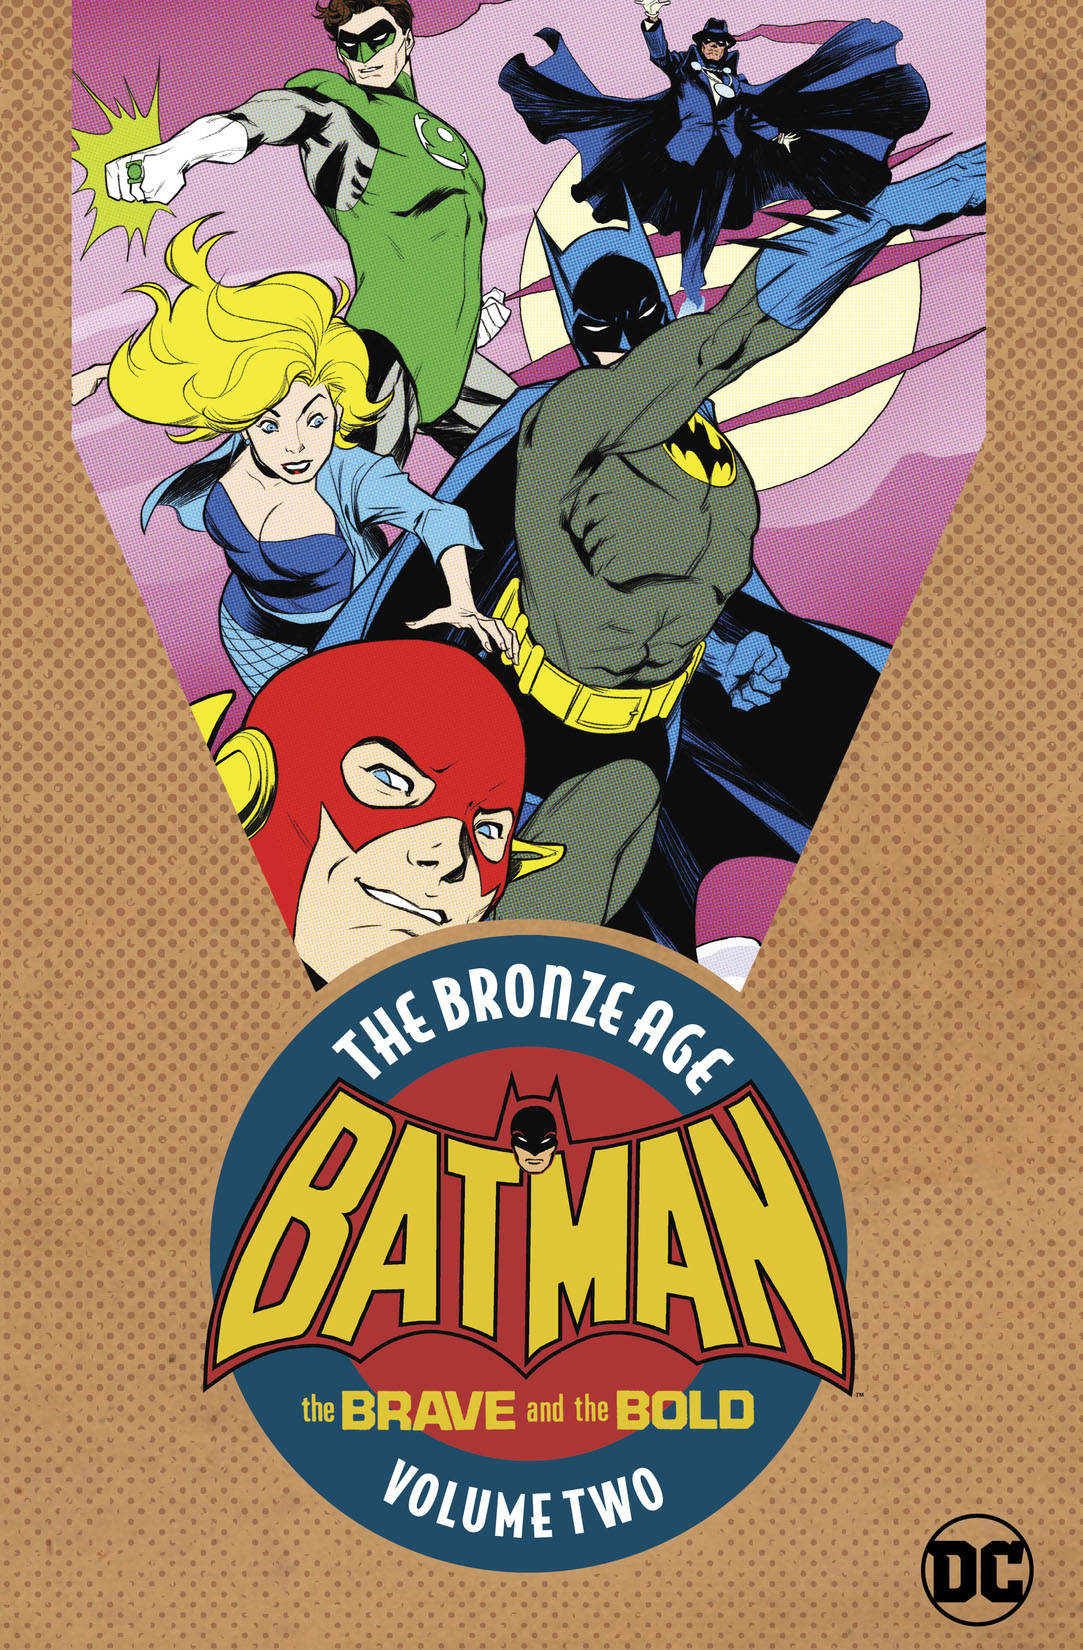 Batman in The Brave & the Bold: The Bronze Age Vol. 2 preview images